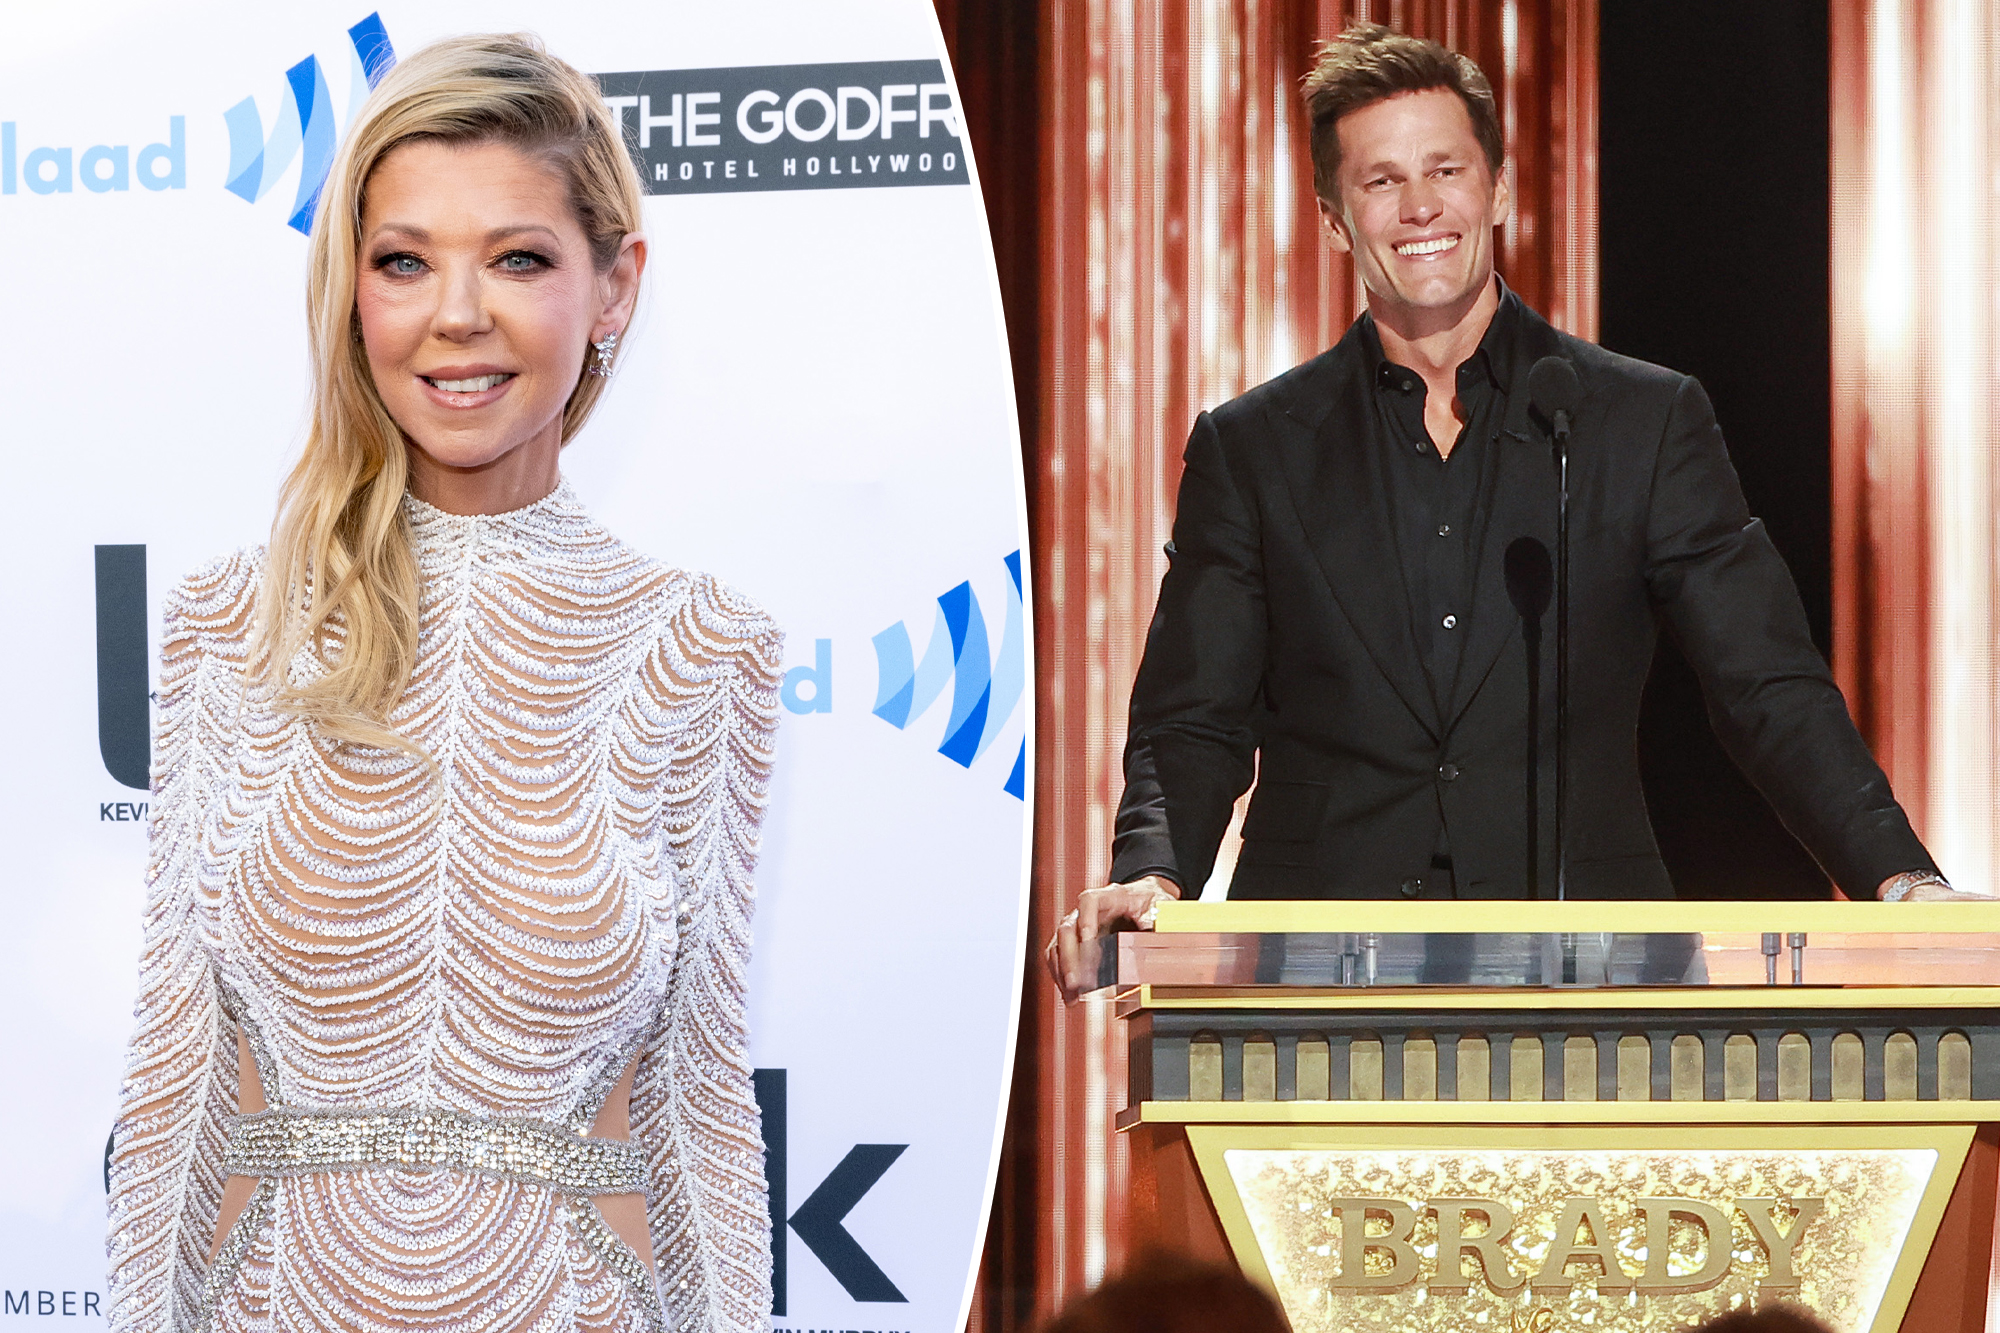 Tara Reid's Reaction to Tom Brady's Roast Unveiled: A Closer Look at Their Past Relationship